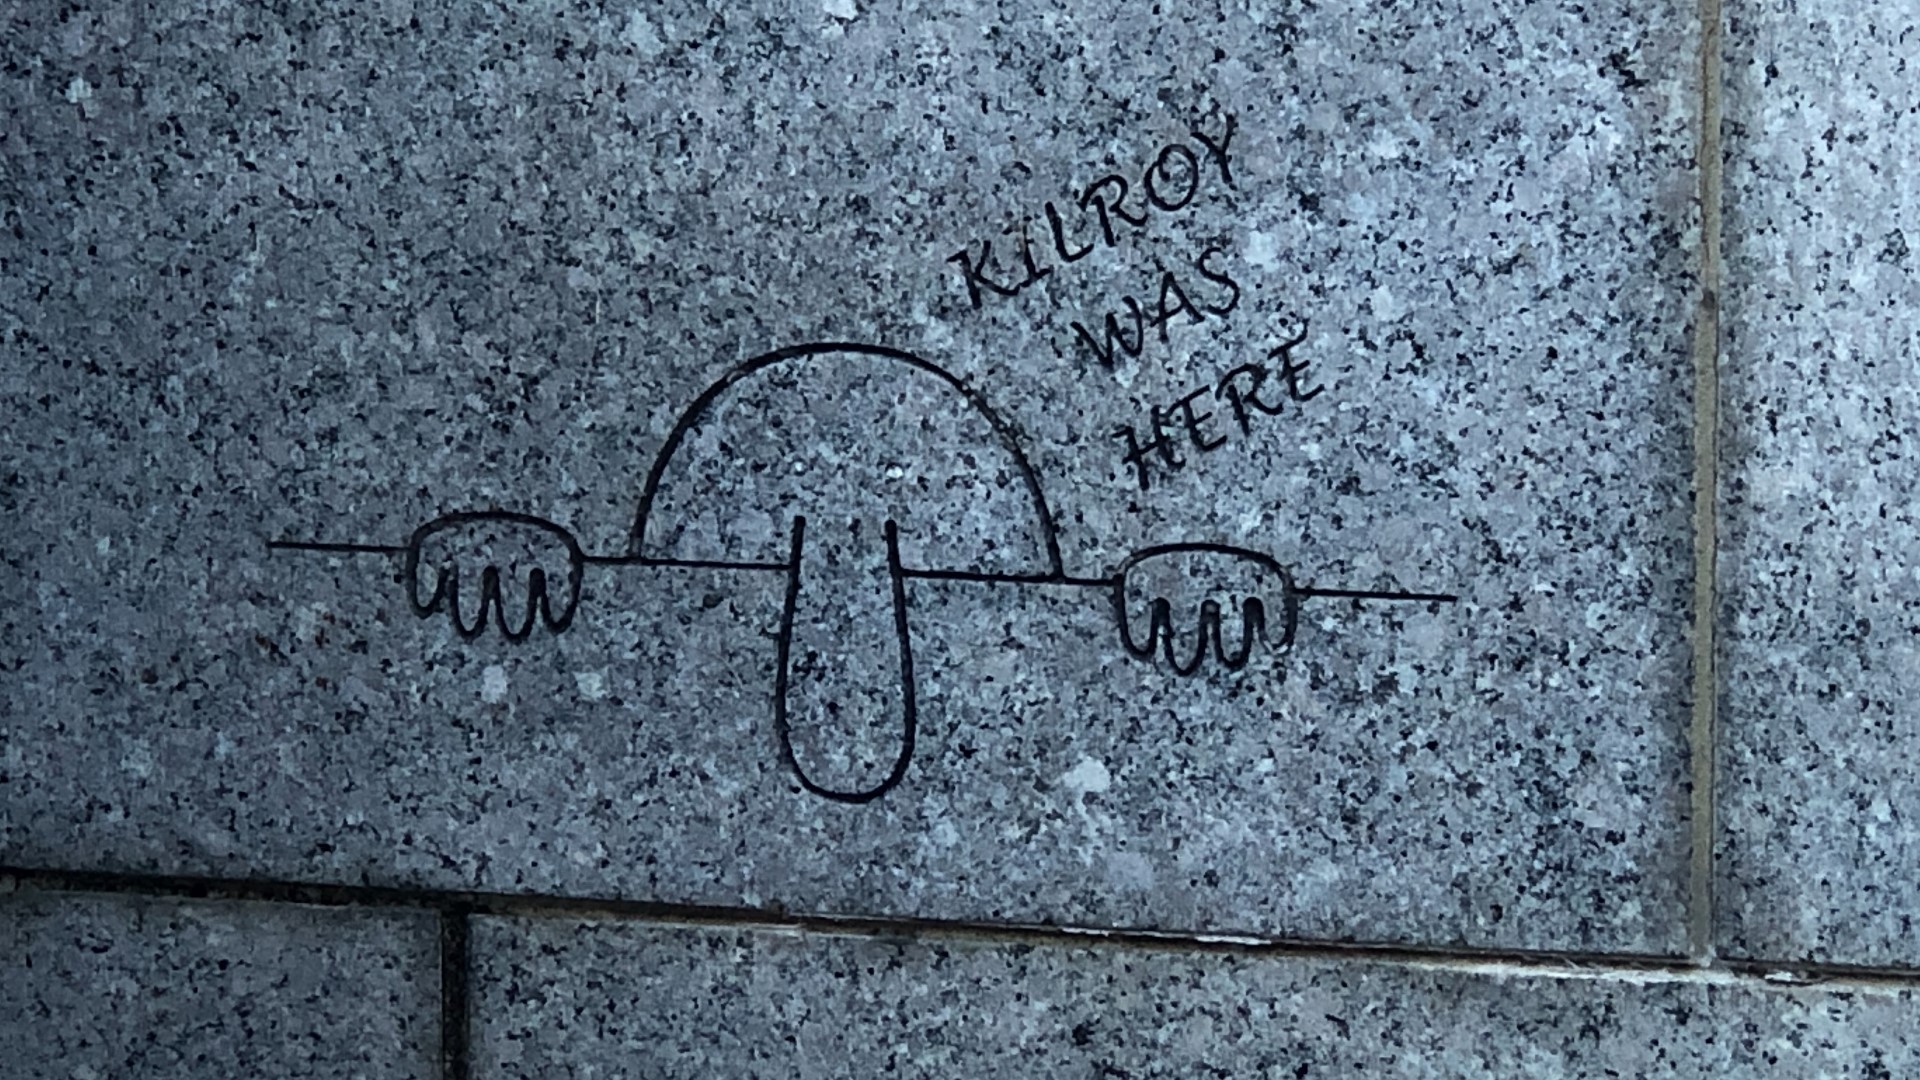 'Kilroy was here' graffiti boosted morale during WWII | wusa9.com